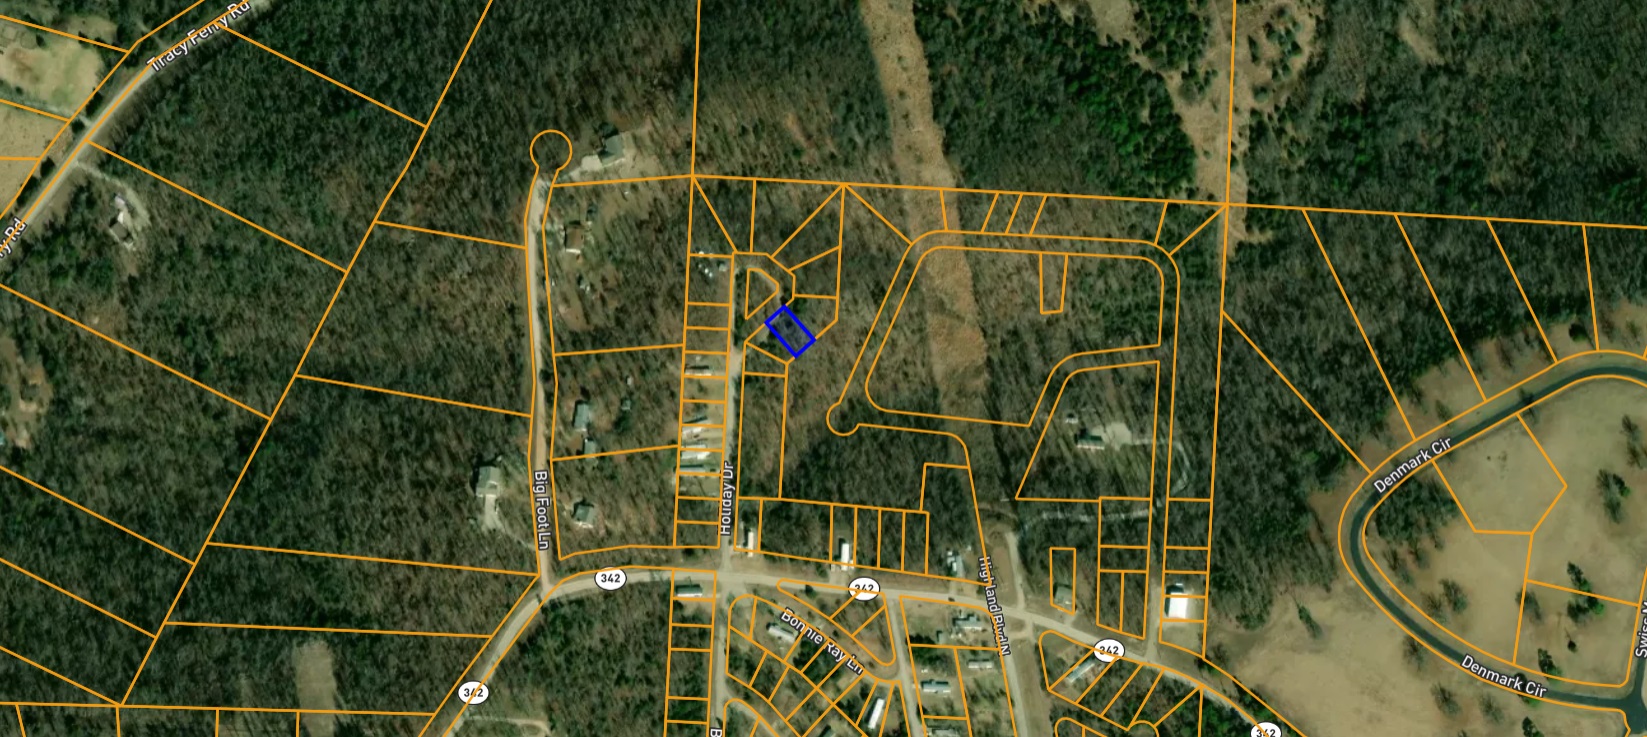 Lot 19, Holiday Drive, Briarcliff, AR 72653